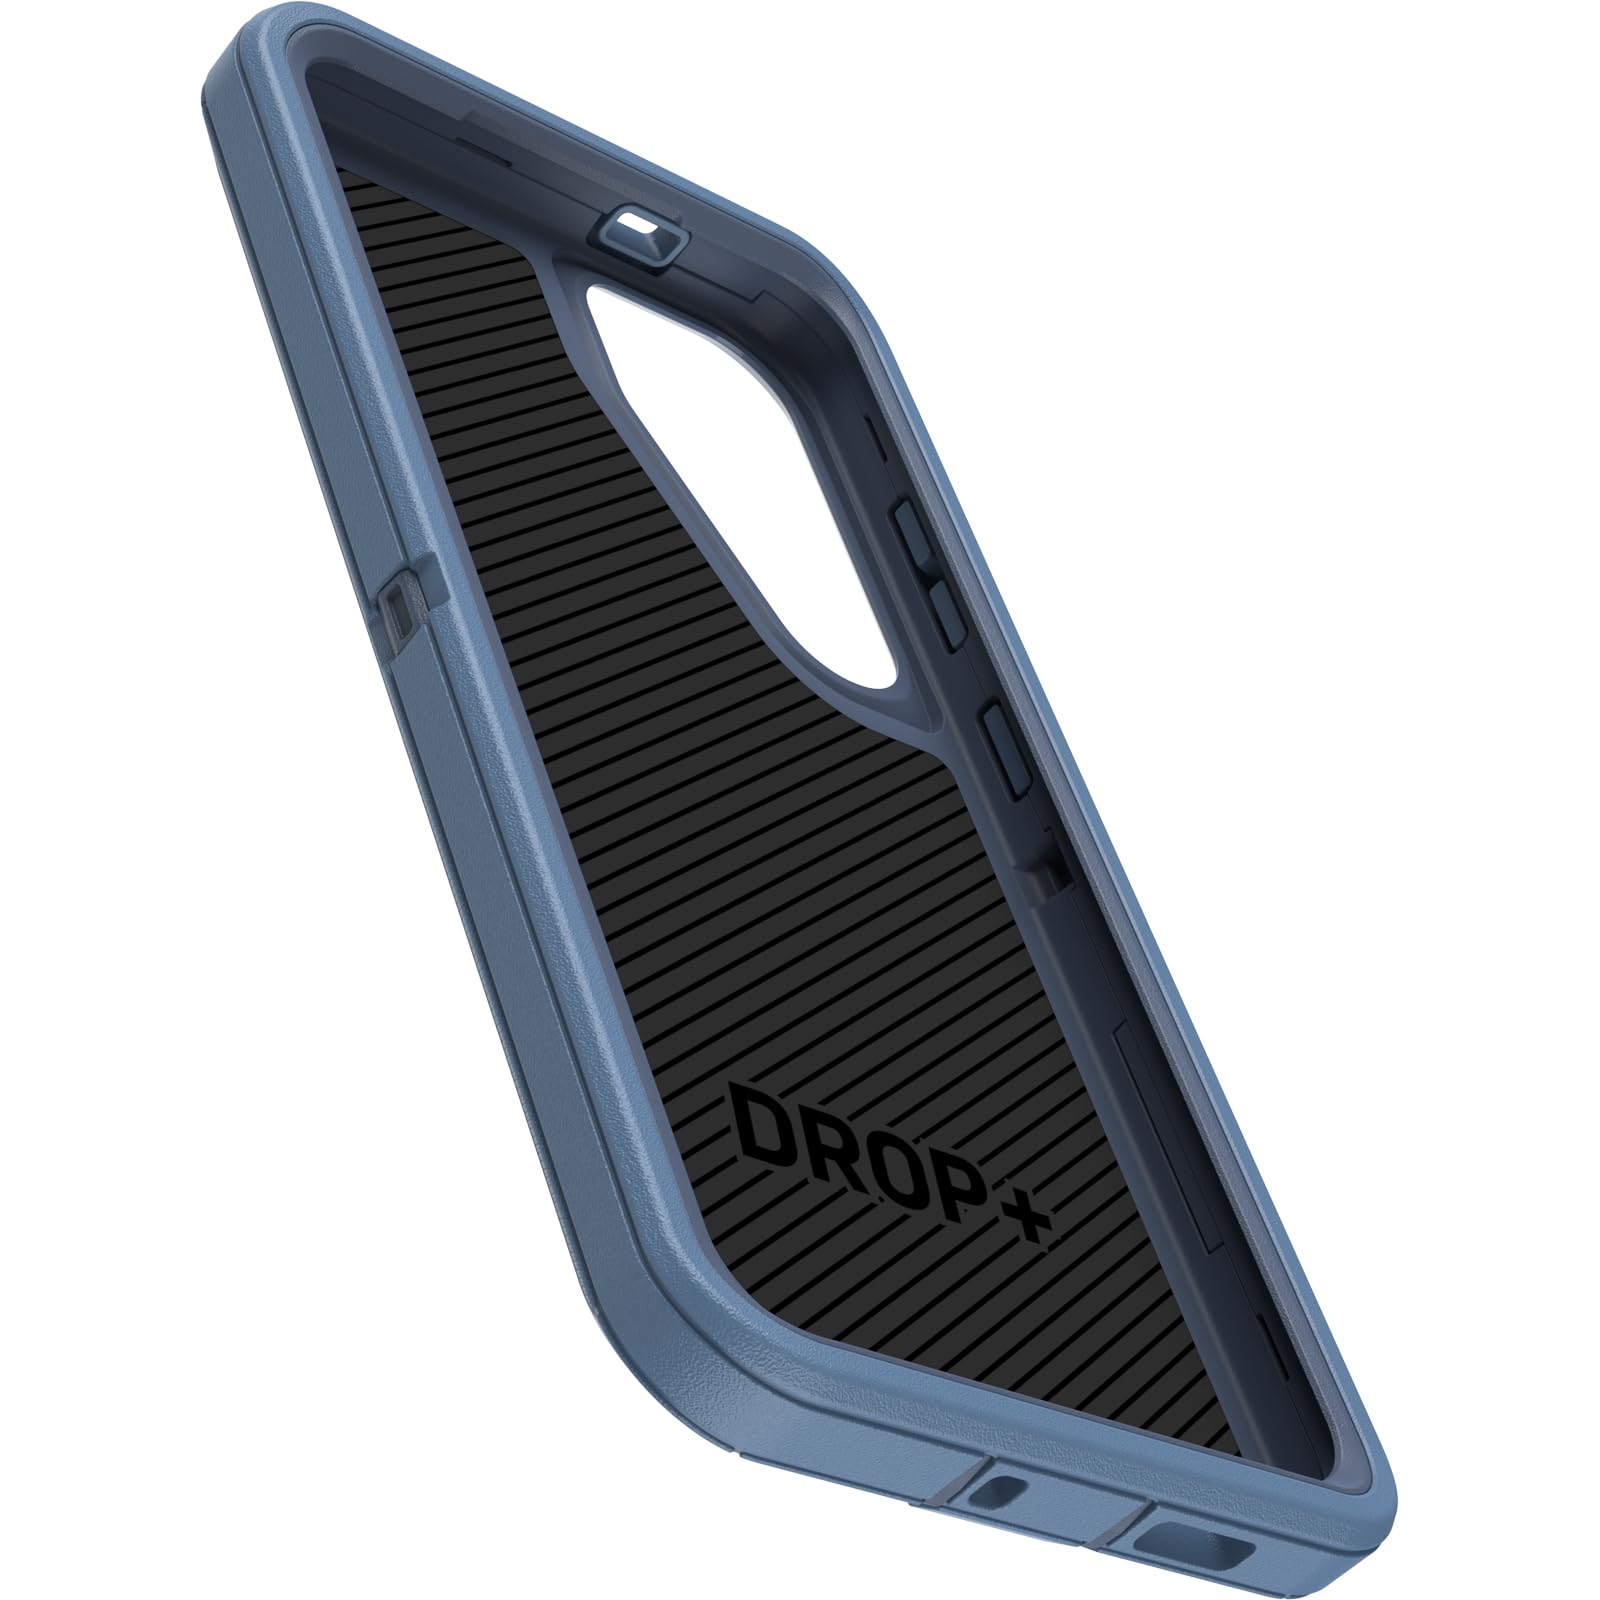 OtterBox Samsung Galaxy S24+ Defender Series Case - Baby Blue Jeans, Rugged & Durable, with Port Protection, Includes Holster Clip Kickstand